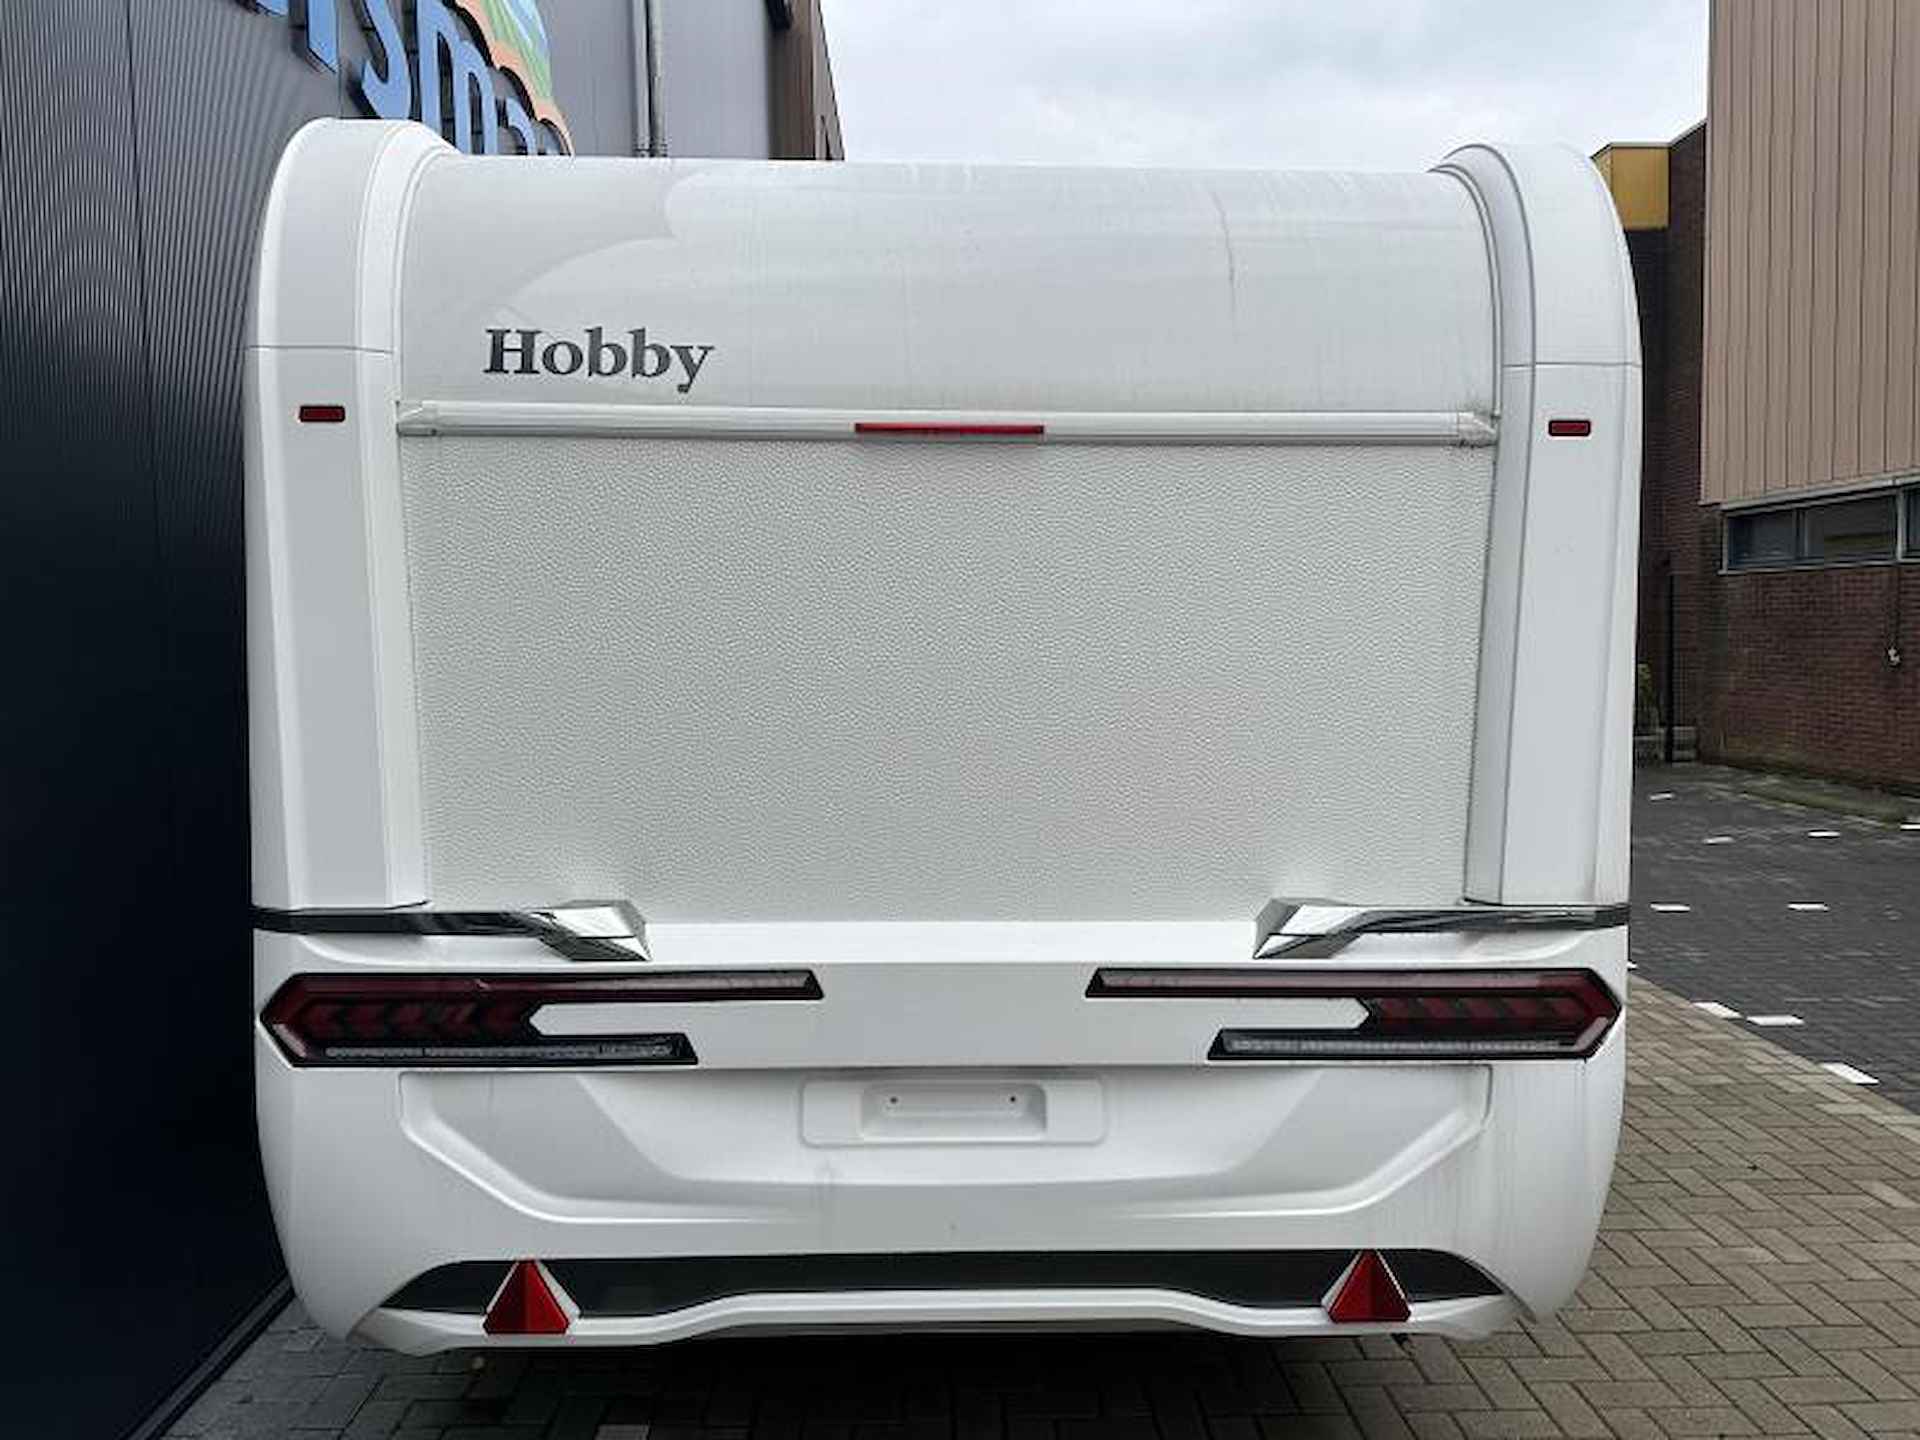 Hobby Excellent Edition 490 KMF Stapelbed indeling - 6/23